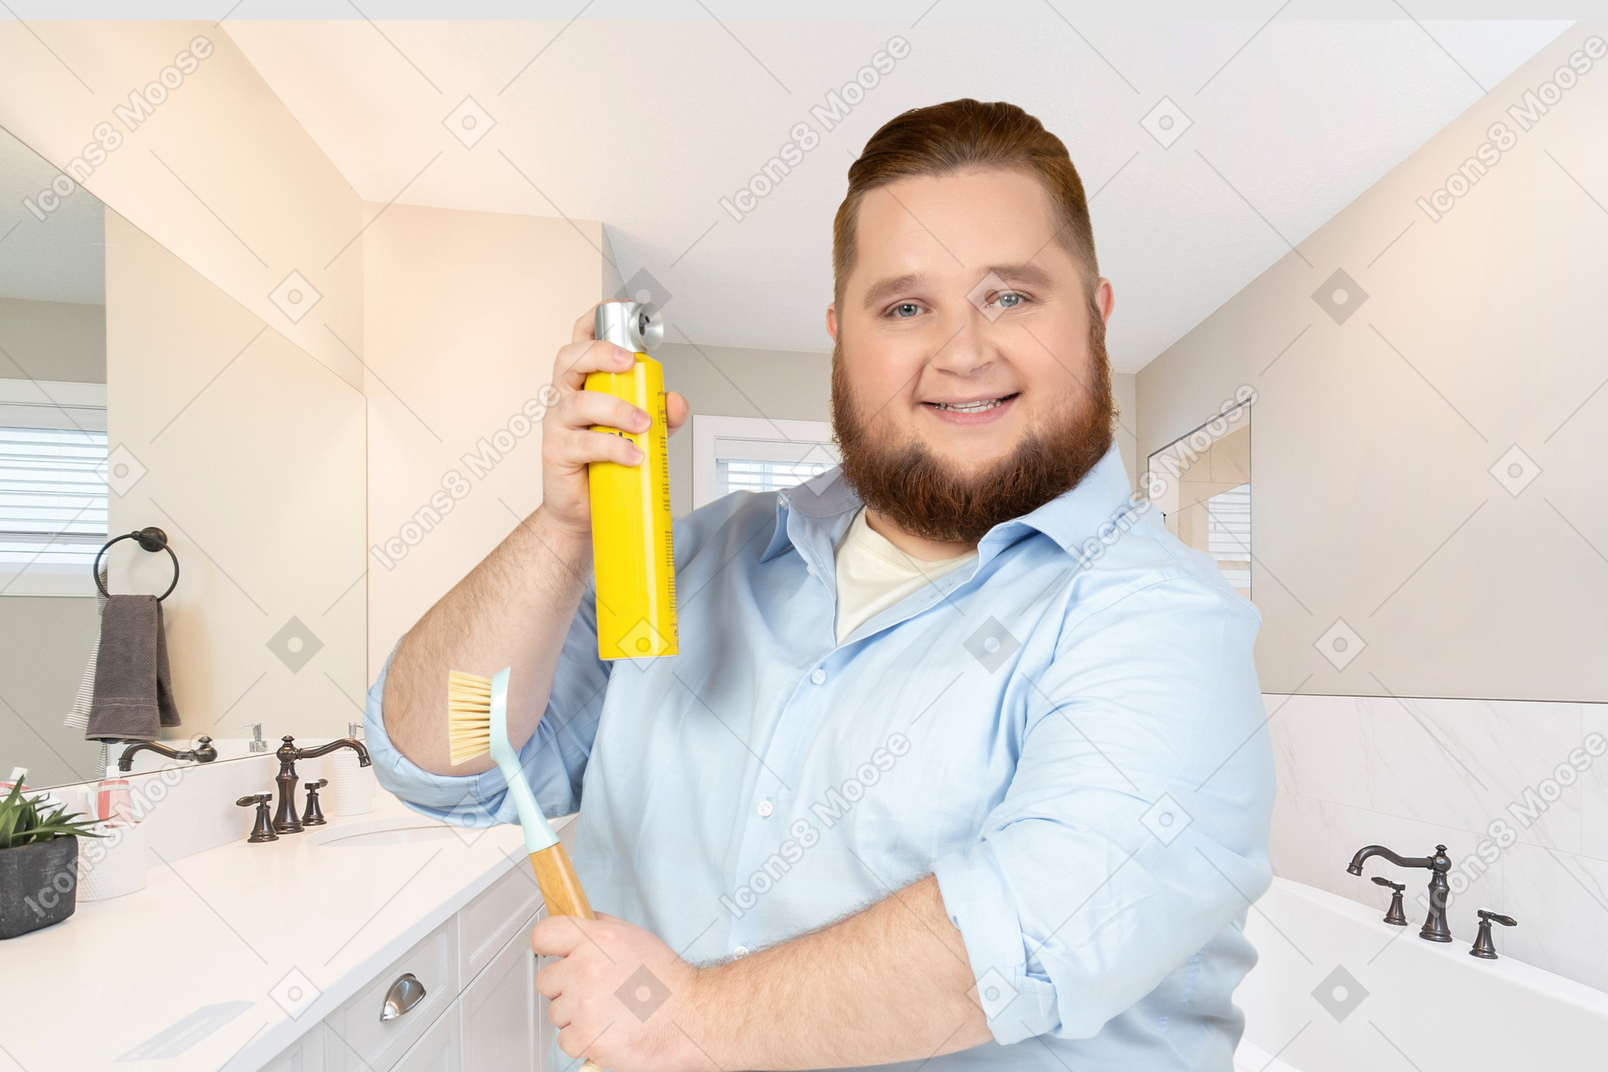 Man cleaning the bathroom in his house